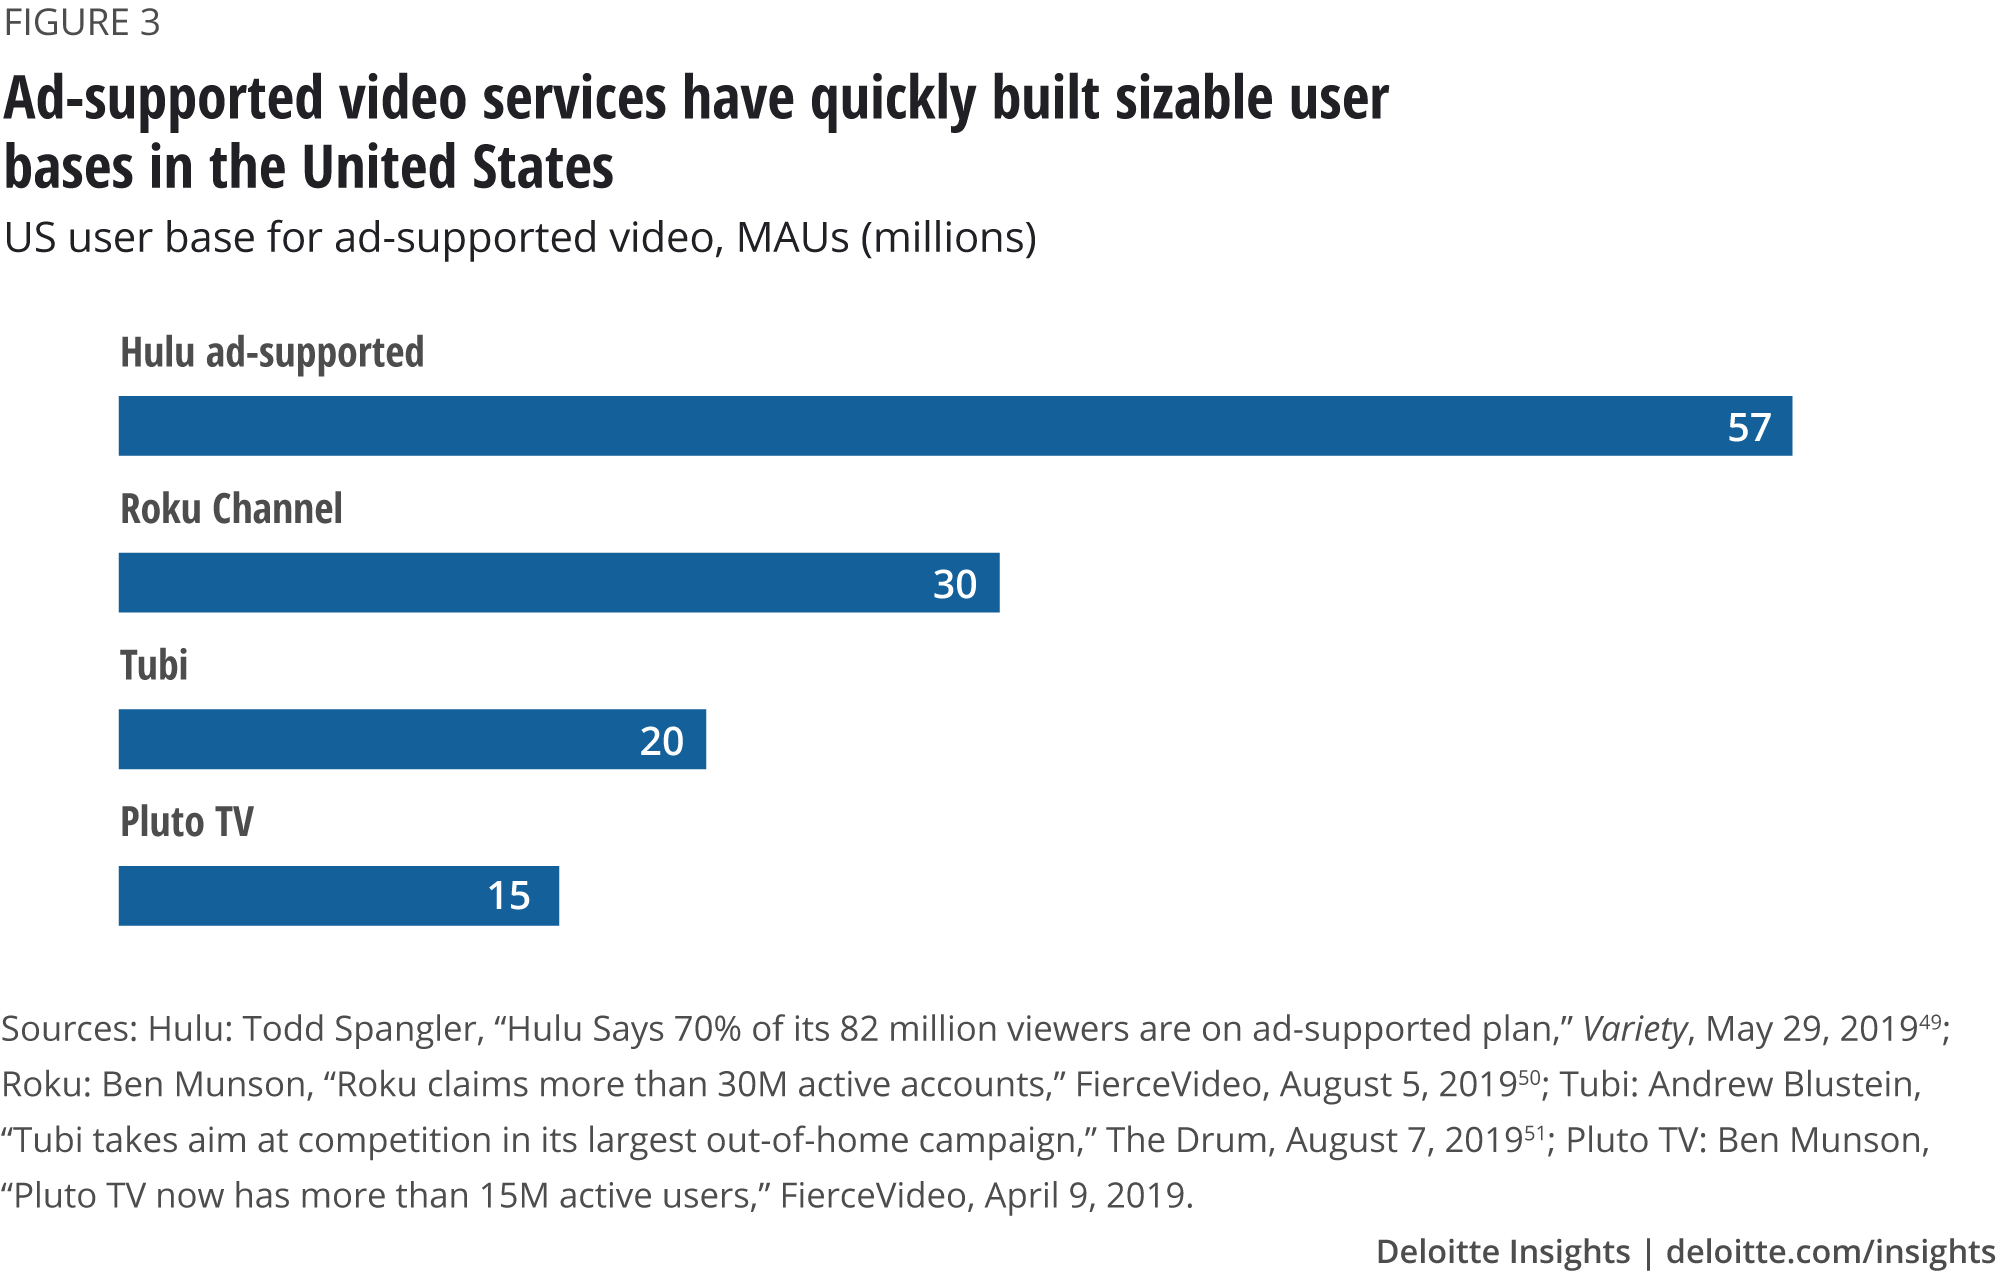 Ad-supported video services have quickly built sizable user bases in the United States